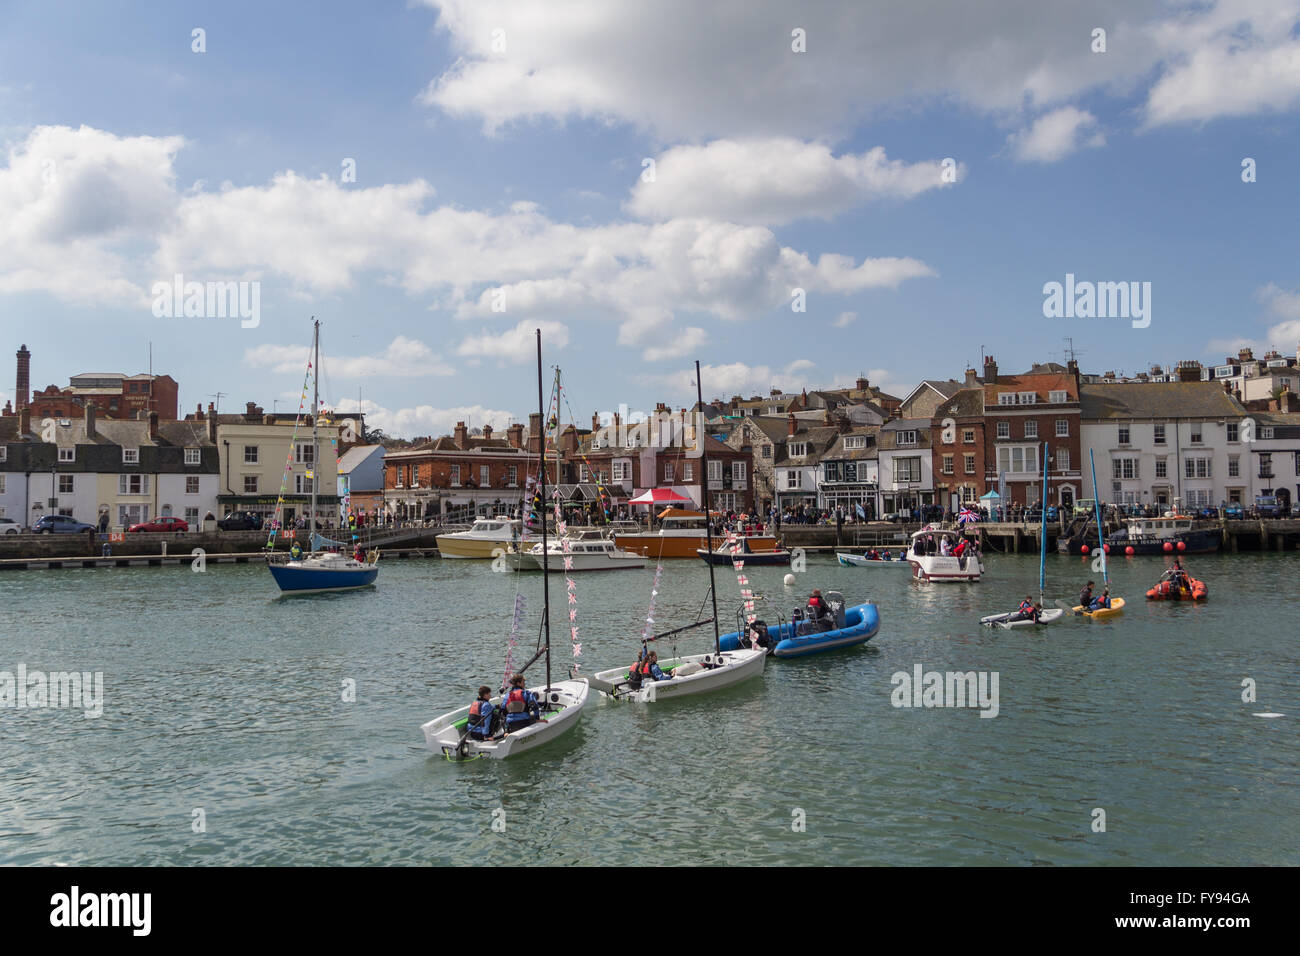 Weymouth, England. 23 April 2016. Queen's 90th Birthday Floating Tribute. Small boat flotilla, turning. Credit:  Frances Underwood/Alamy Live News Stock Photo